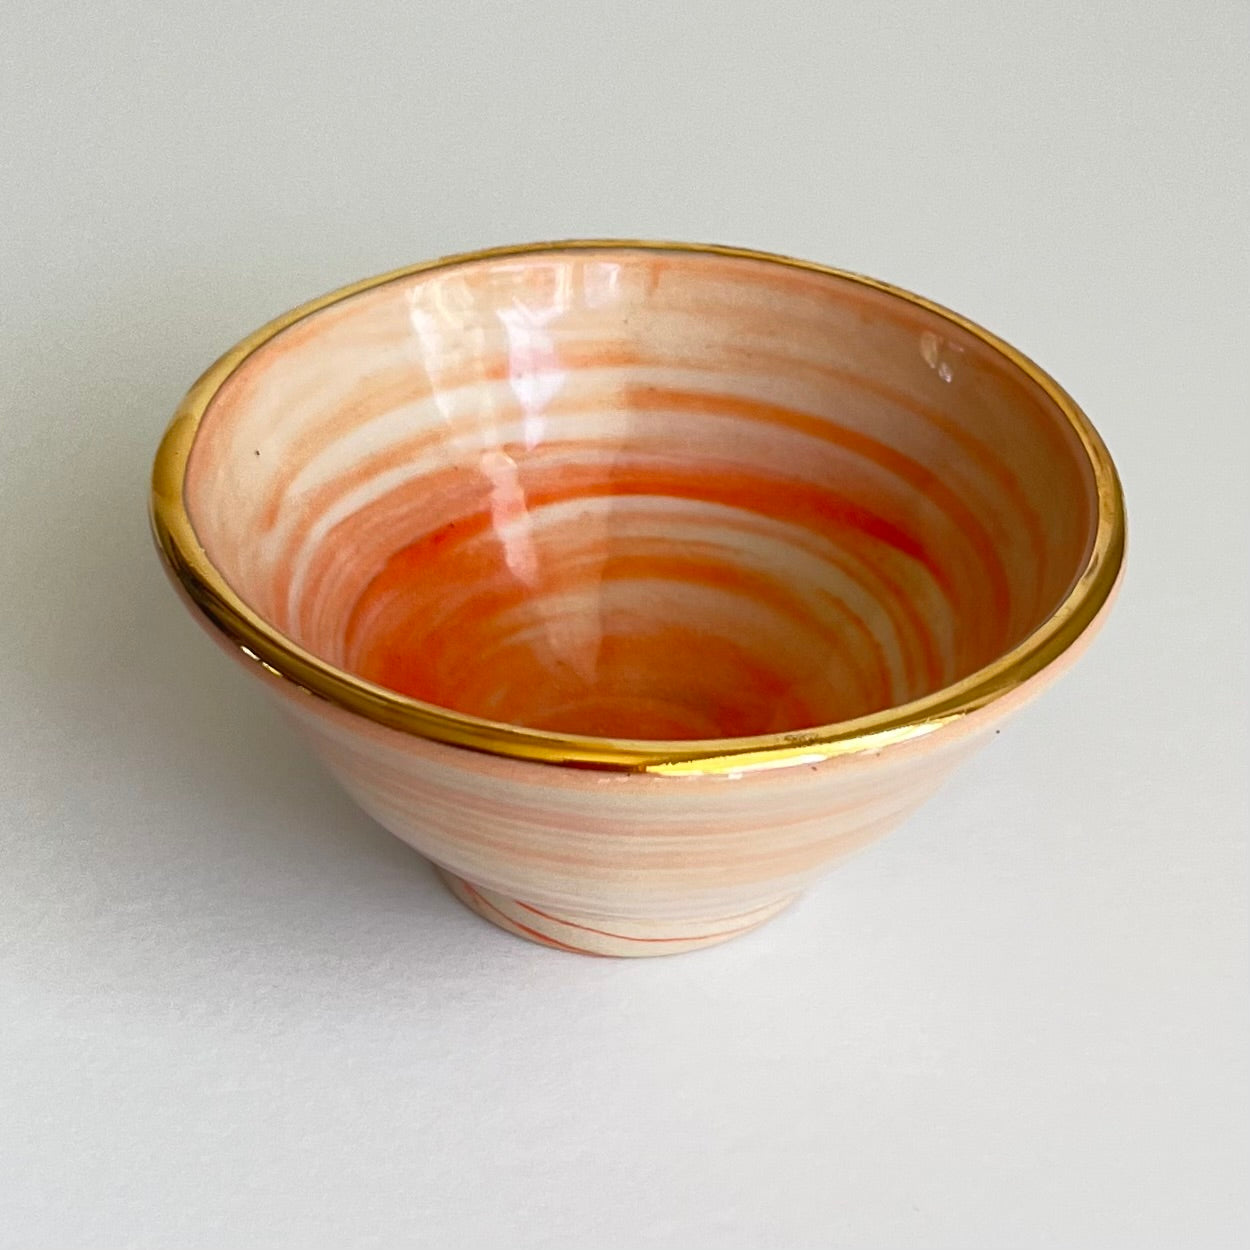 Small "Creamsicle" Swirl Bowl with Lustre